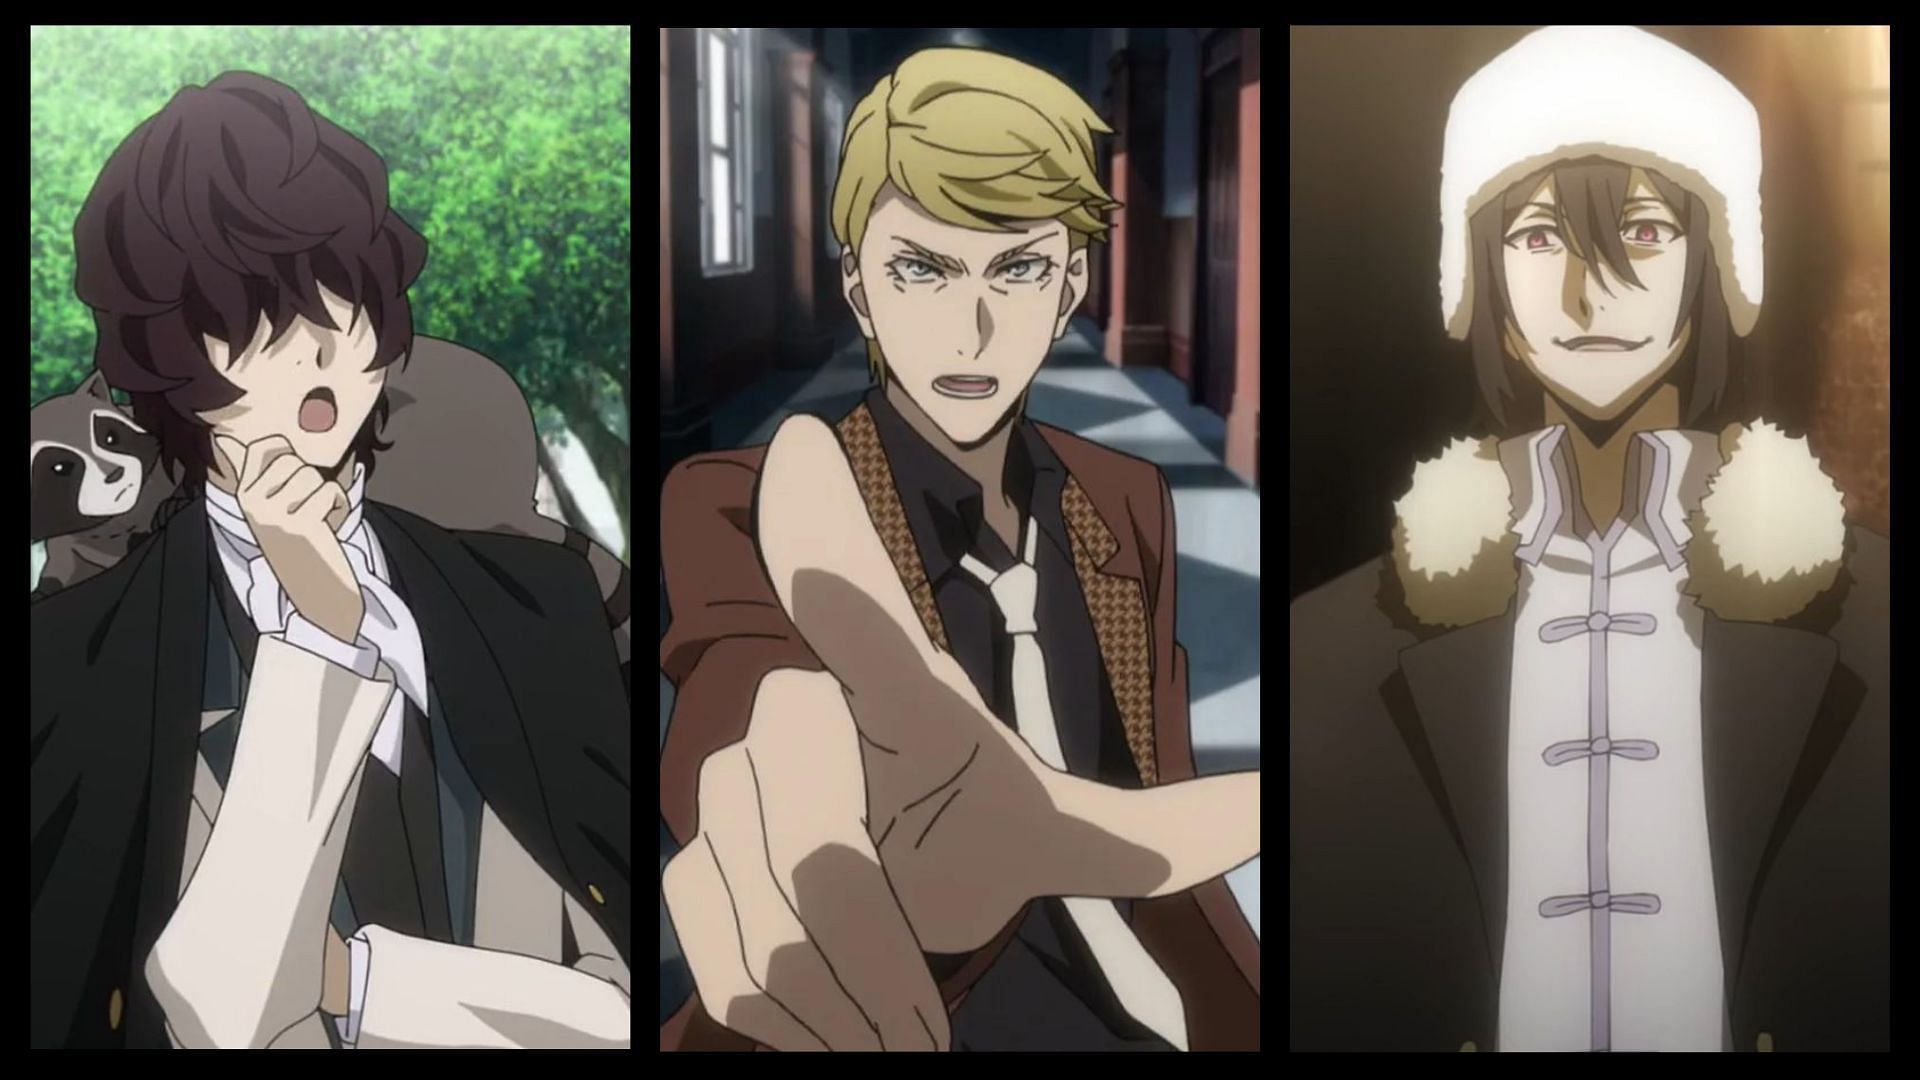 8 Bungo Stray Dogs characters based on popular Western authors